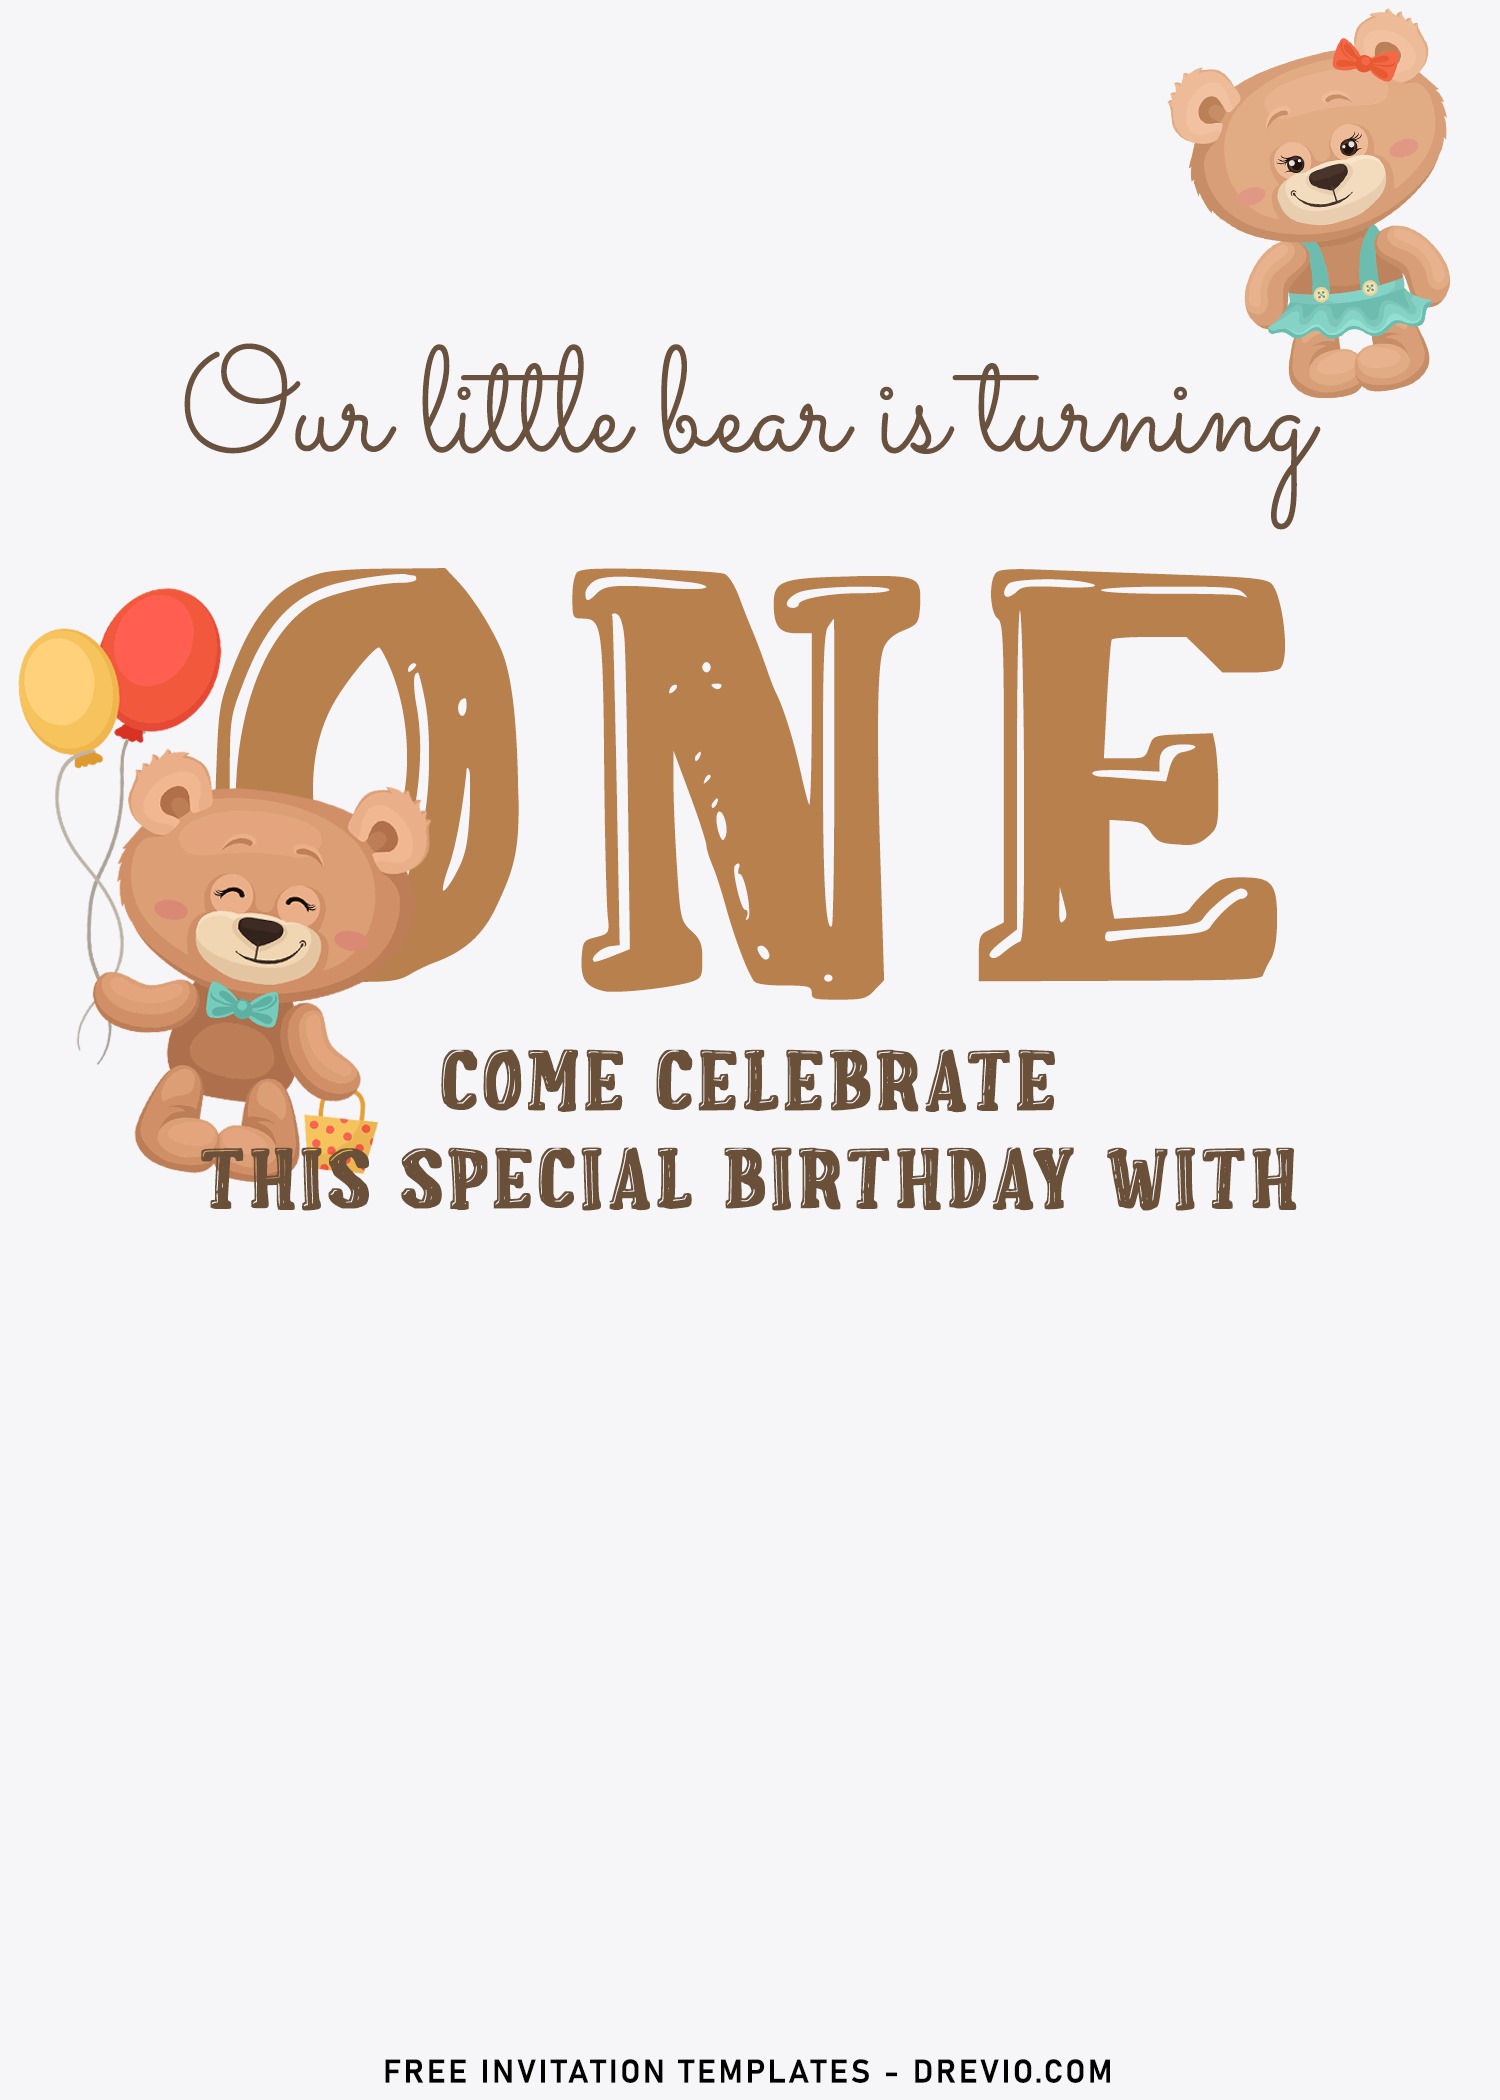 paper-invitations-announcements-our-little-bear-printable-invitation